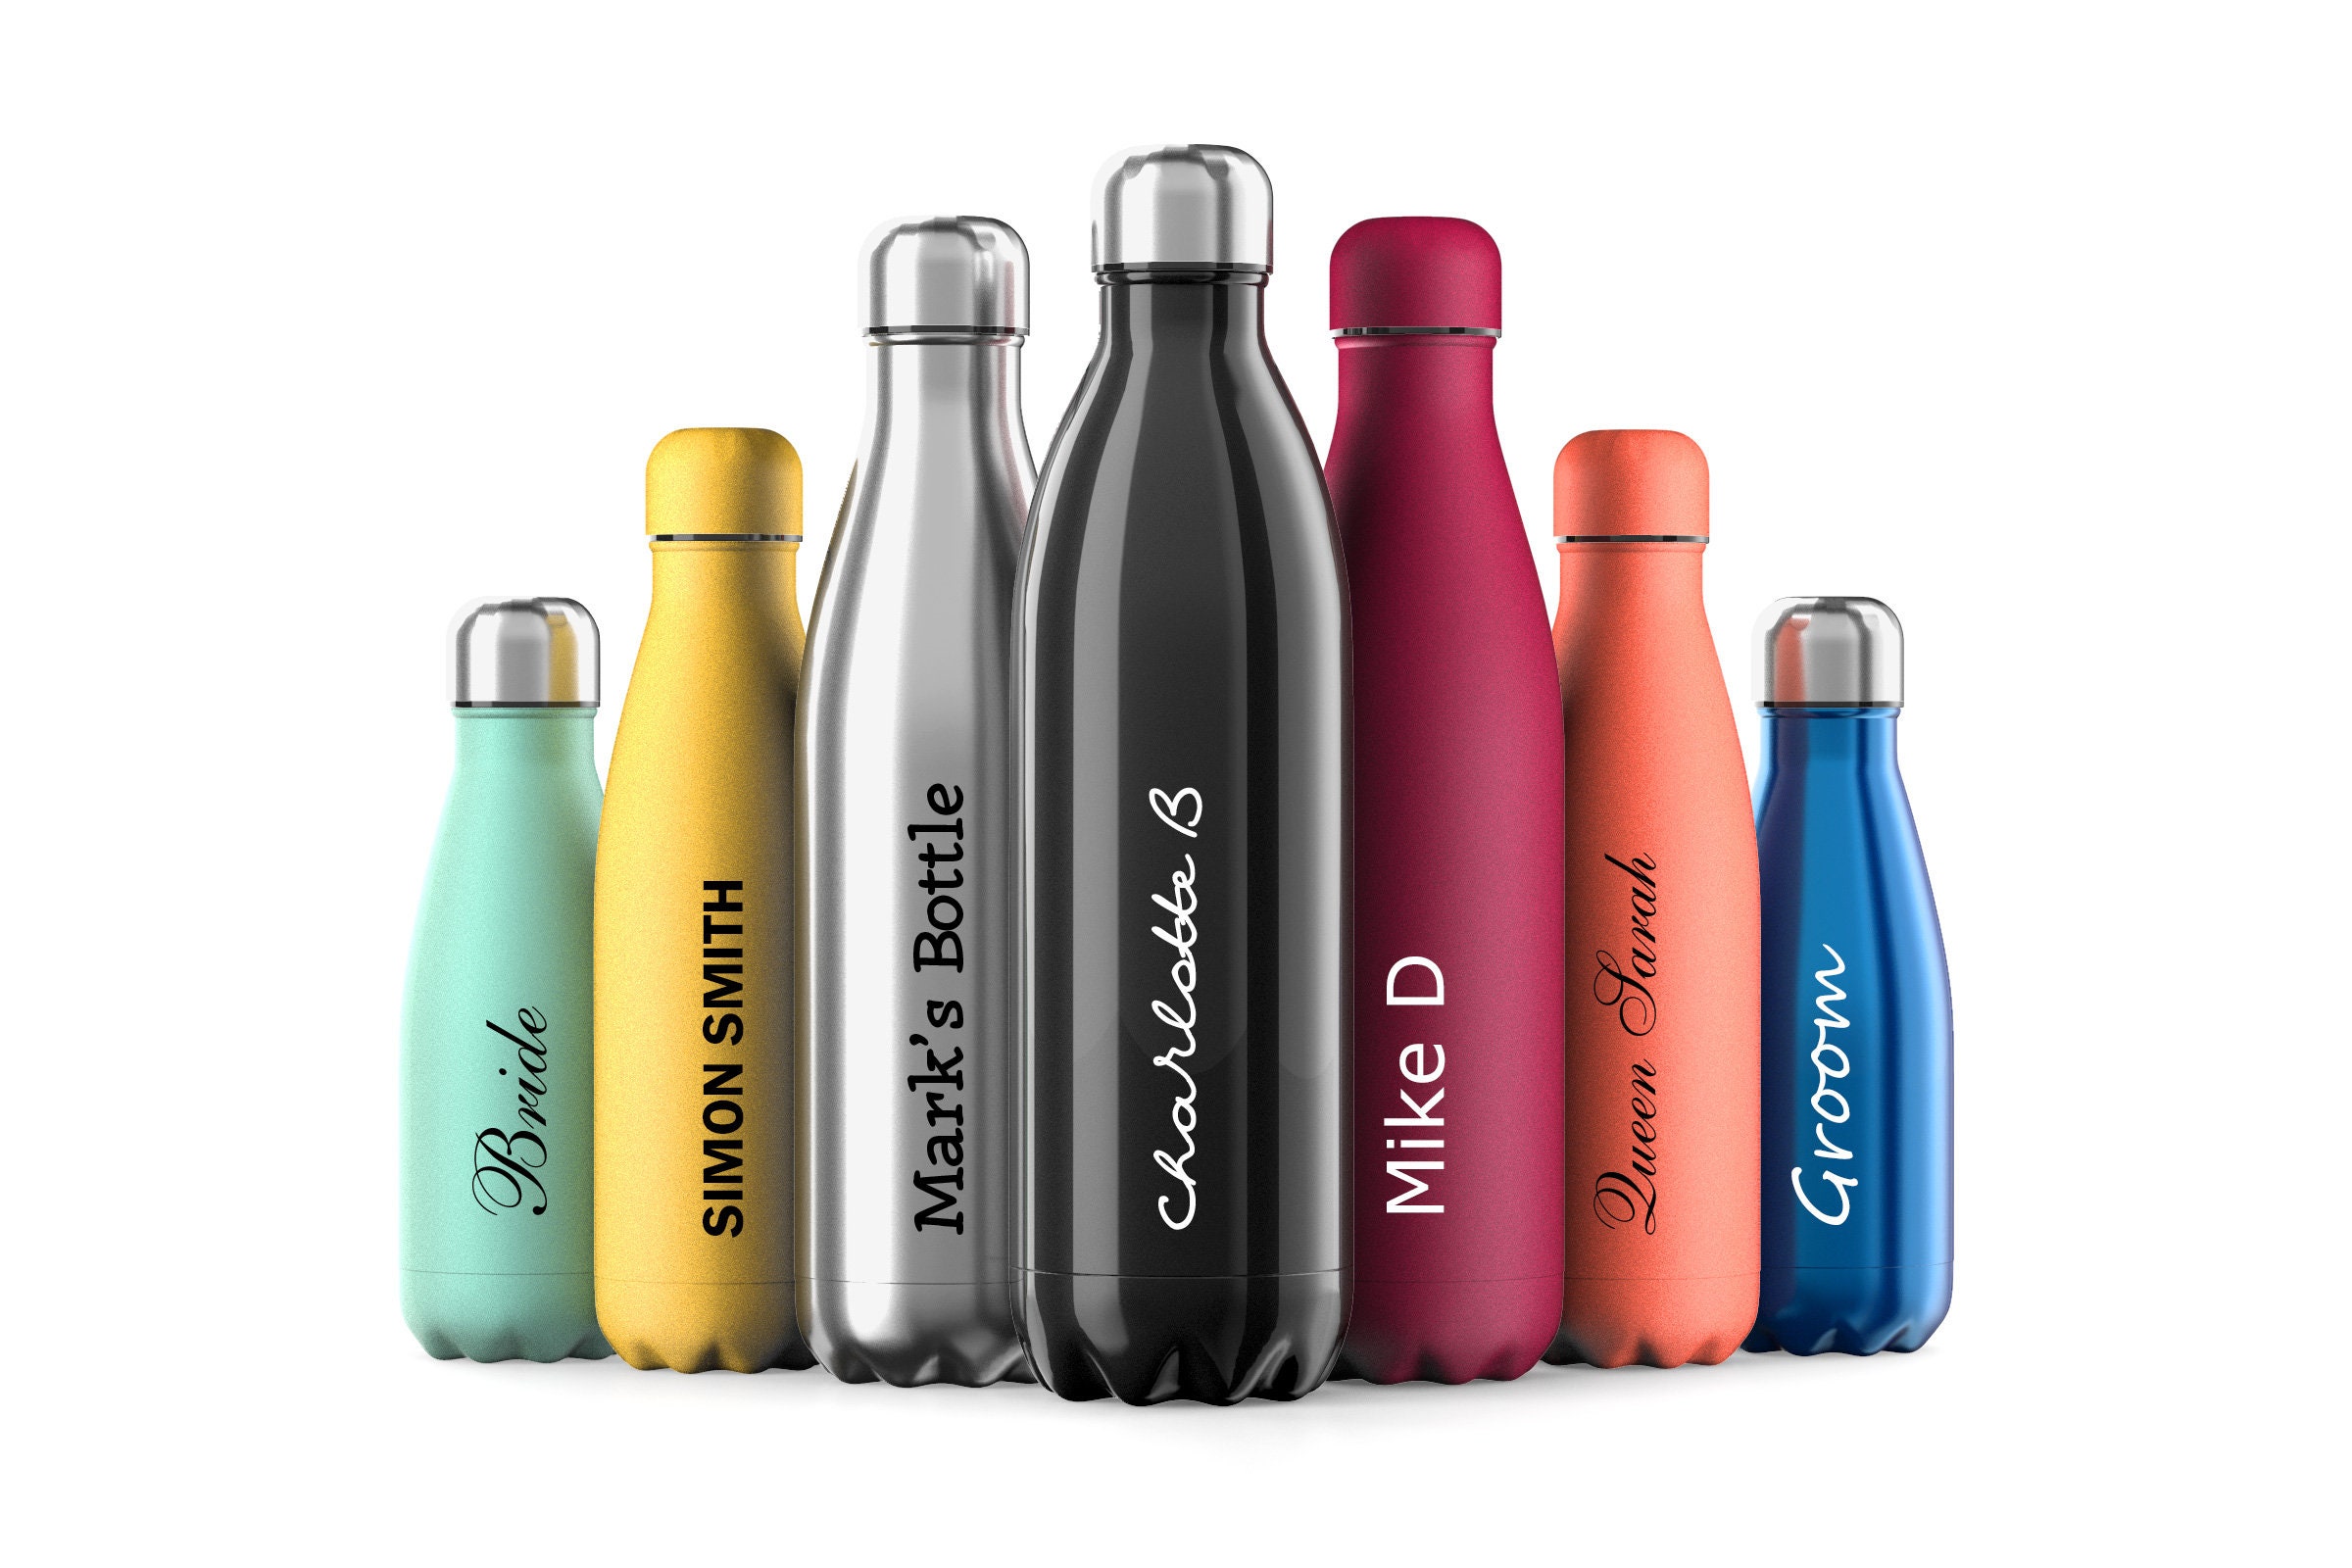 Insulated Metal Sport & Gym Drinks Flask Proworks Stainless Steel Water Bottle 